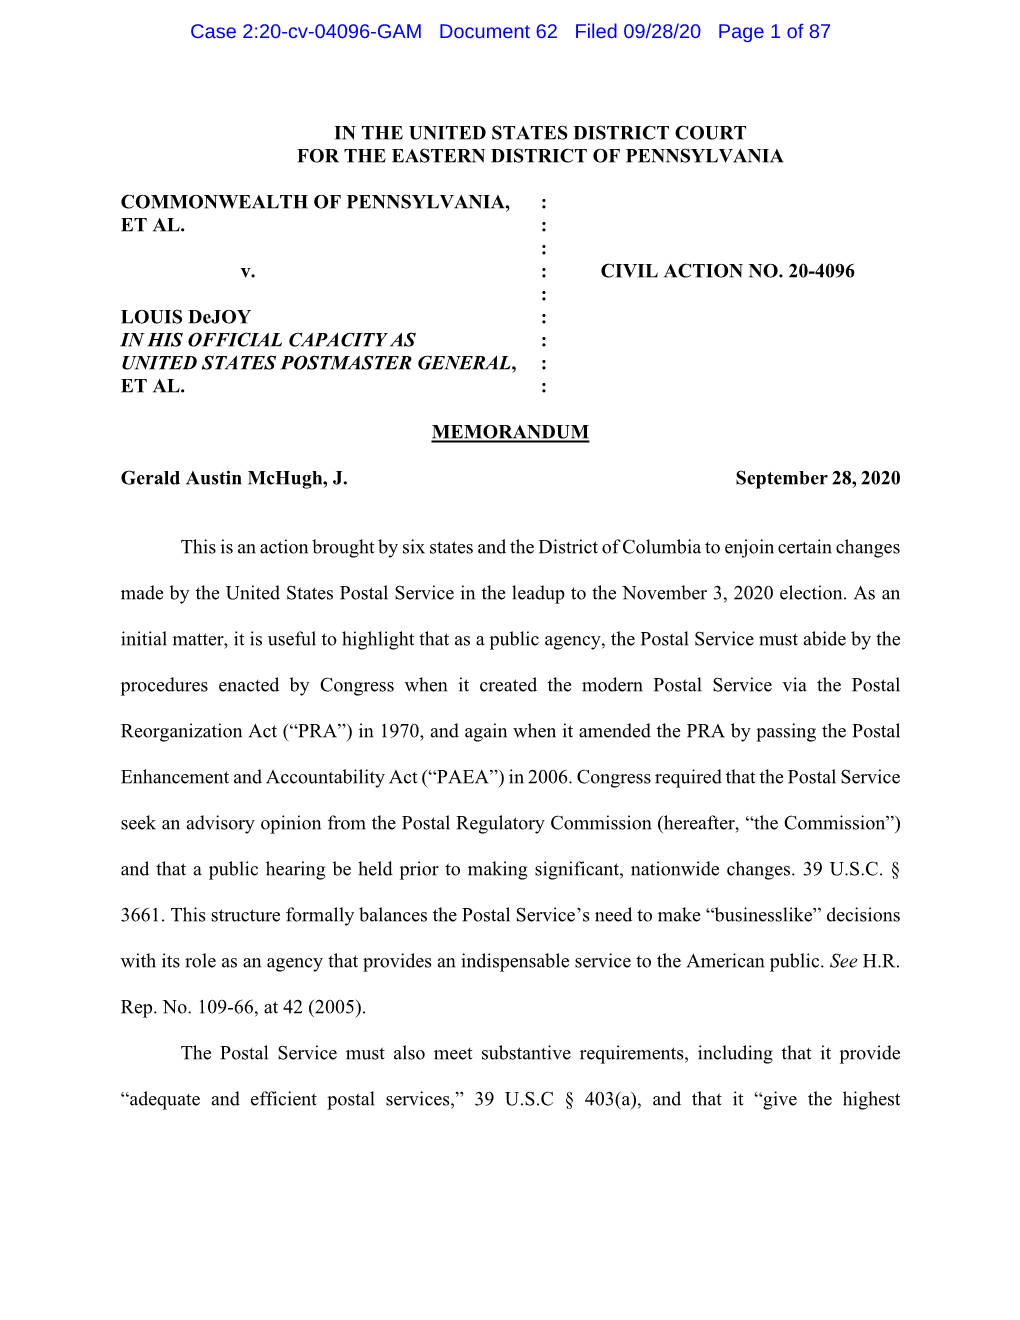 Case 2:20-Cv-04096-GAM Document 62 Filed 09/28/20 Page 1 of 87